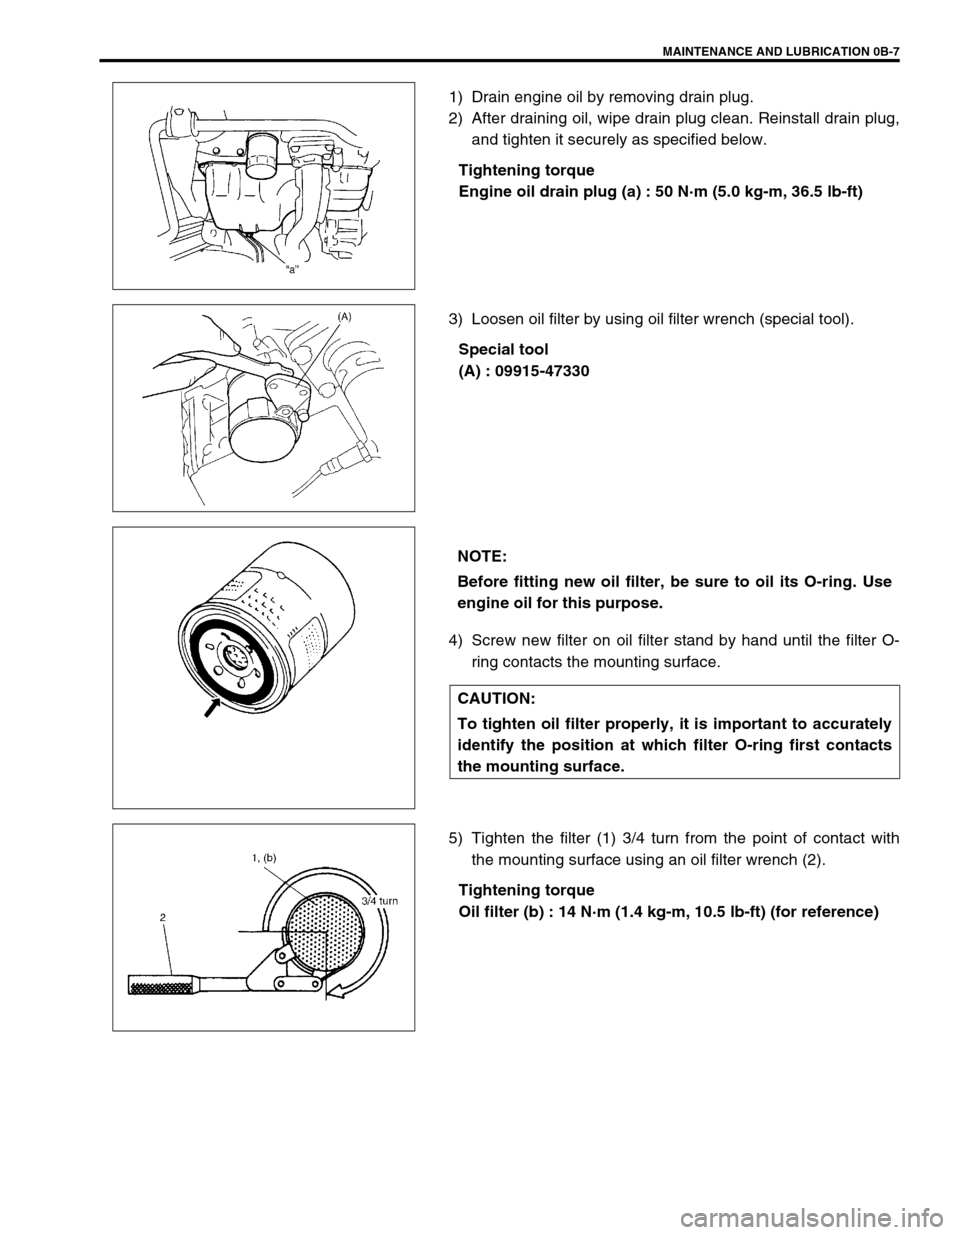 SUZUKI SWIFT 2000 1.G RG413 Service Workshop Manual MAINTENANCE AND LUBRICATION 0B-7
1) Drain engine oil by removing drain plug.
2) After draining oil, wipe drain plug clean. Reinstall drain plug,
and tighten it securely as specified below.
Tightening 